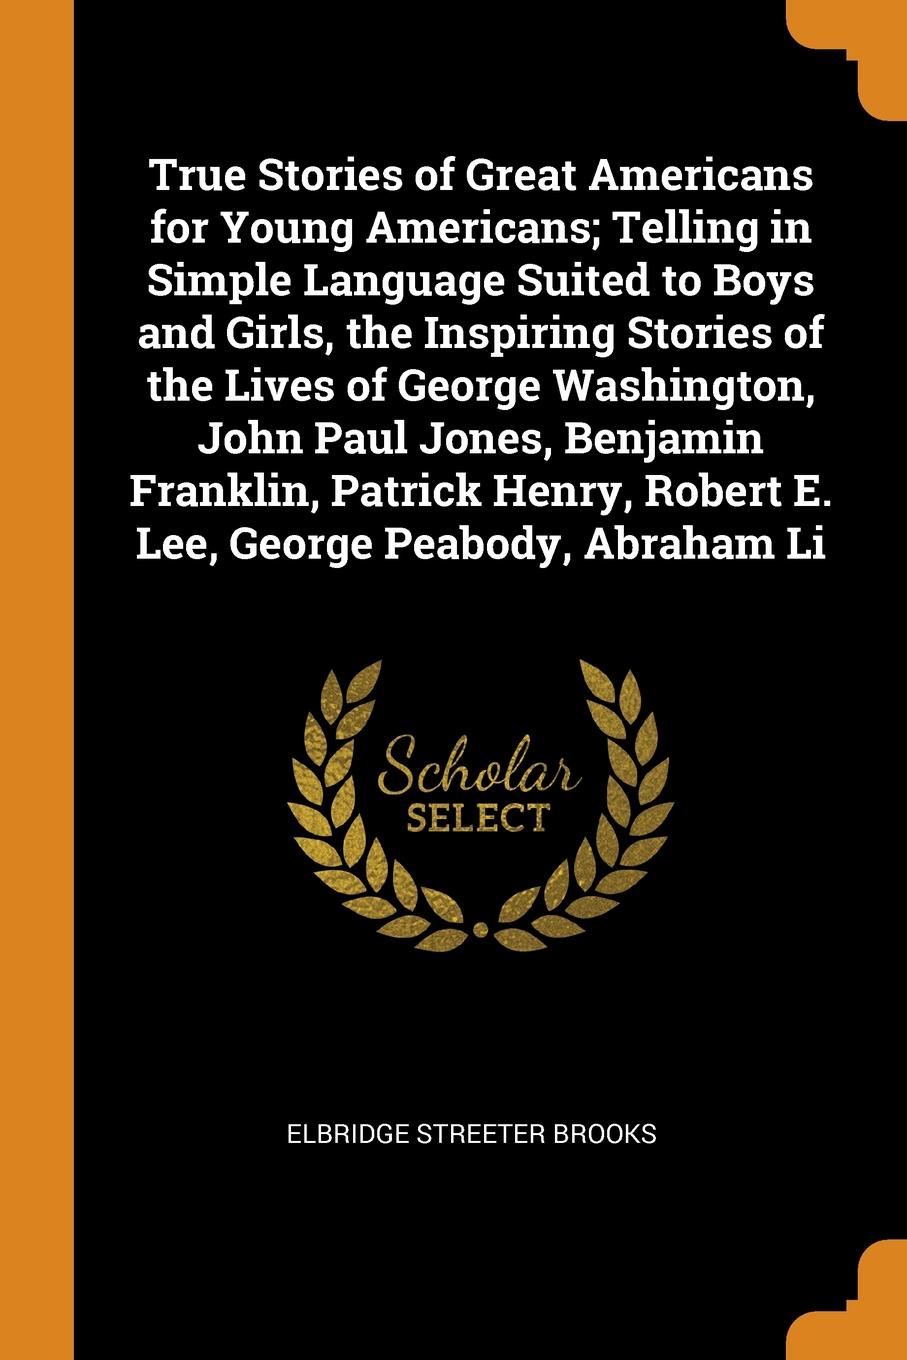 True Stories of Great Americans for Young Americans; Telling in Simple Language Suited to Boys and Girls, the Inspiring Stories of the Lives of George Washington, John Paul Jones, Benjamin Franklin, Patrick Henry, Robert E. Lee, George Peabody, Ab...